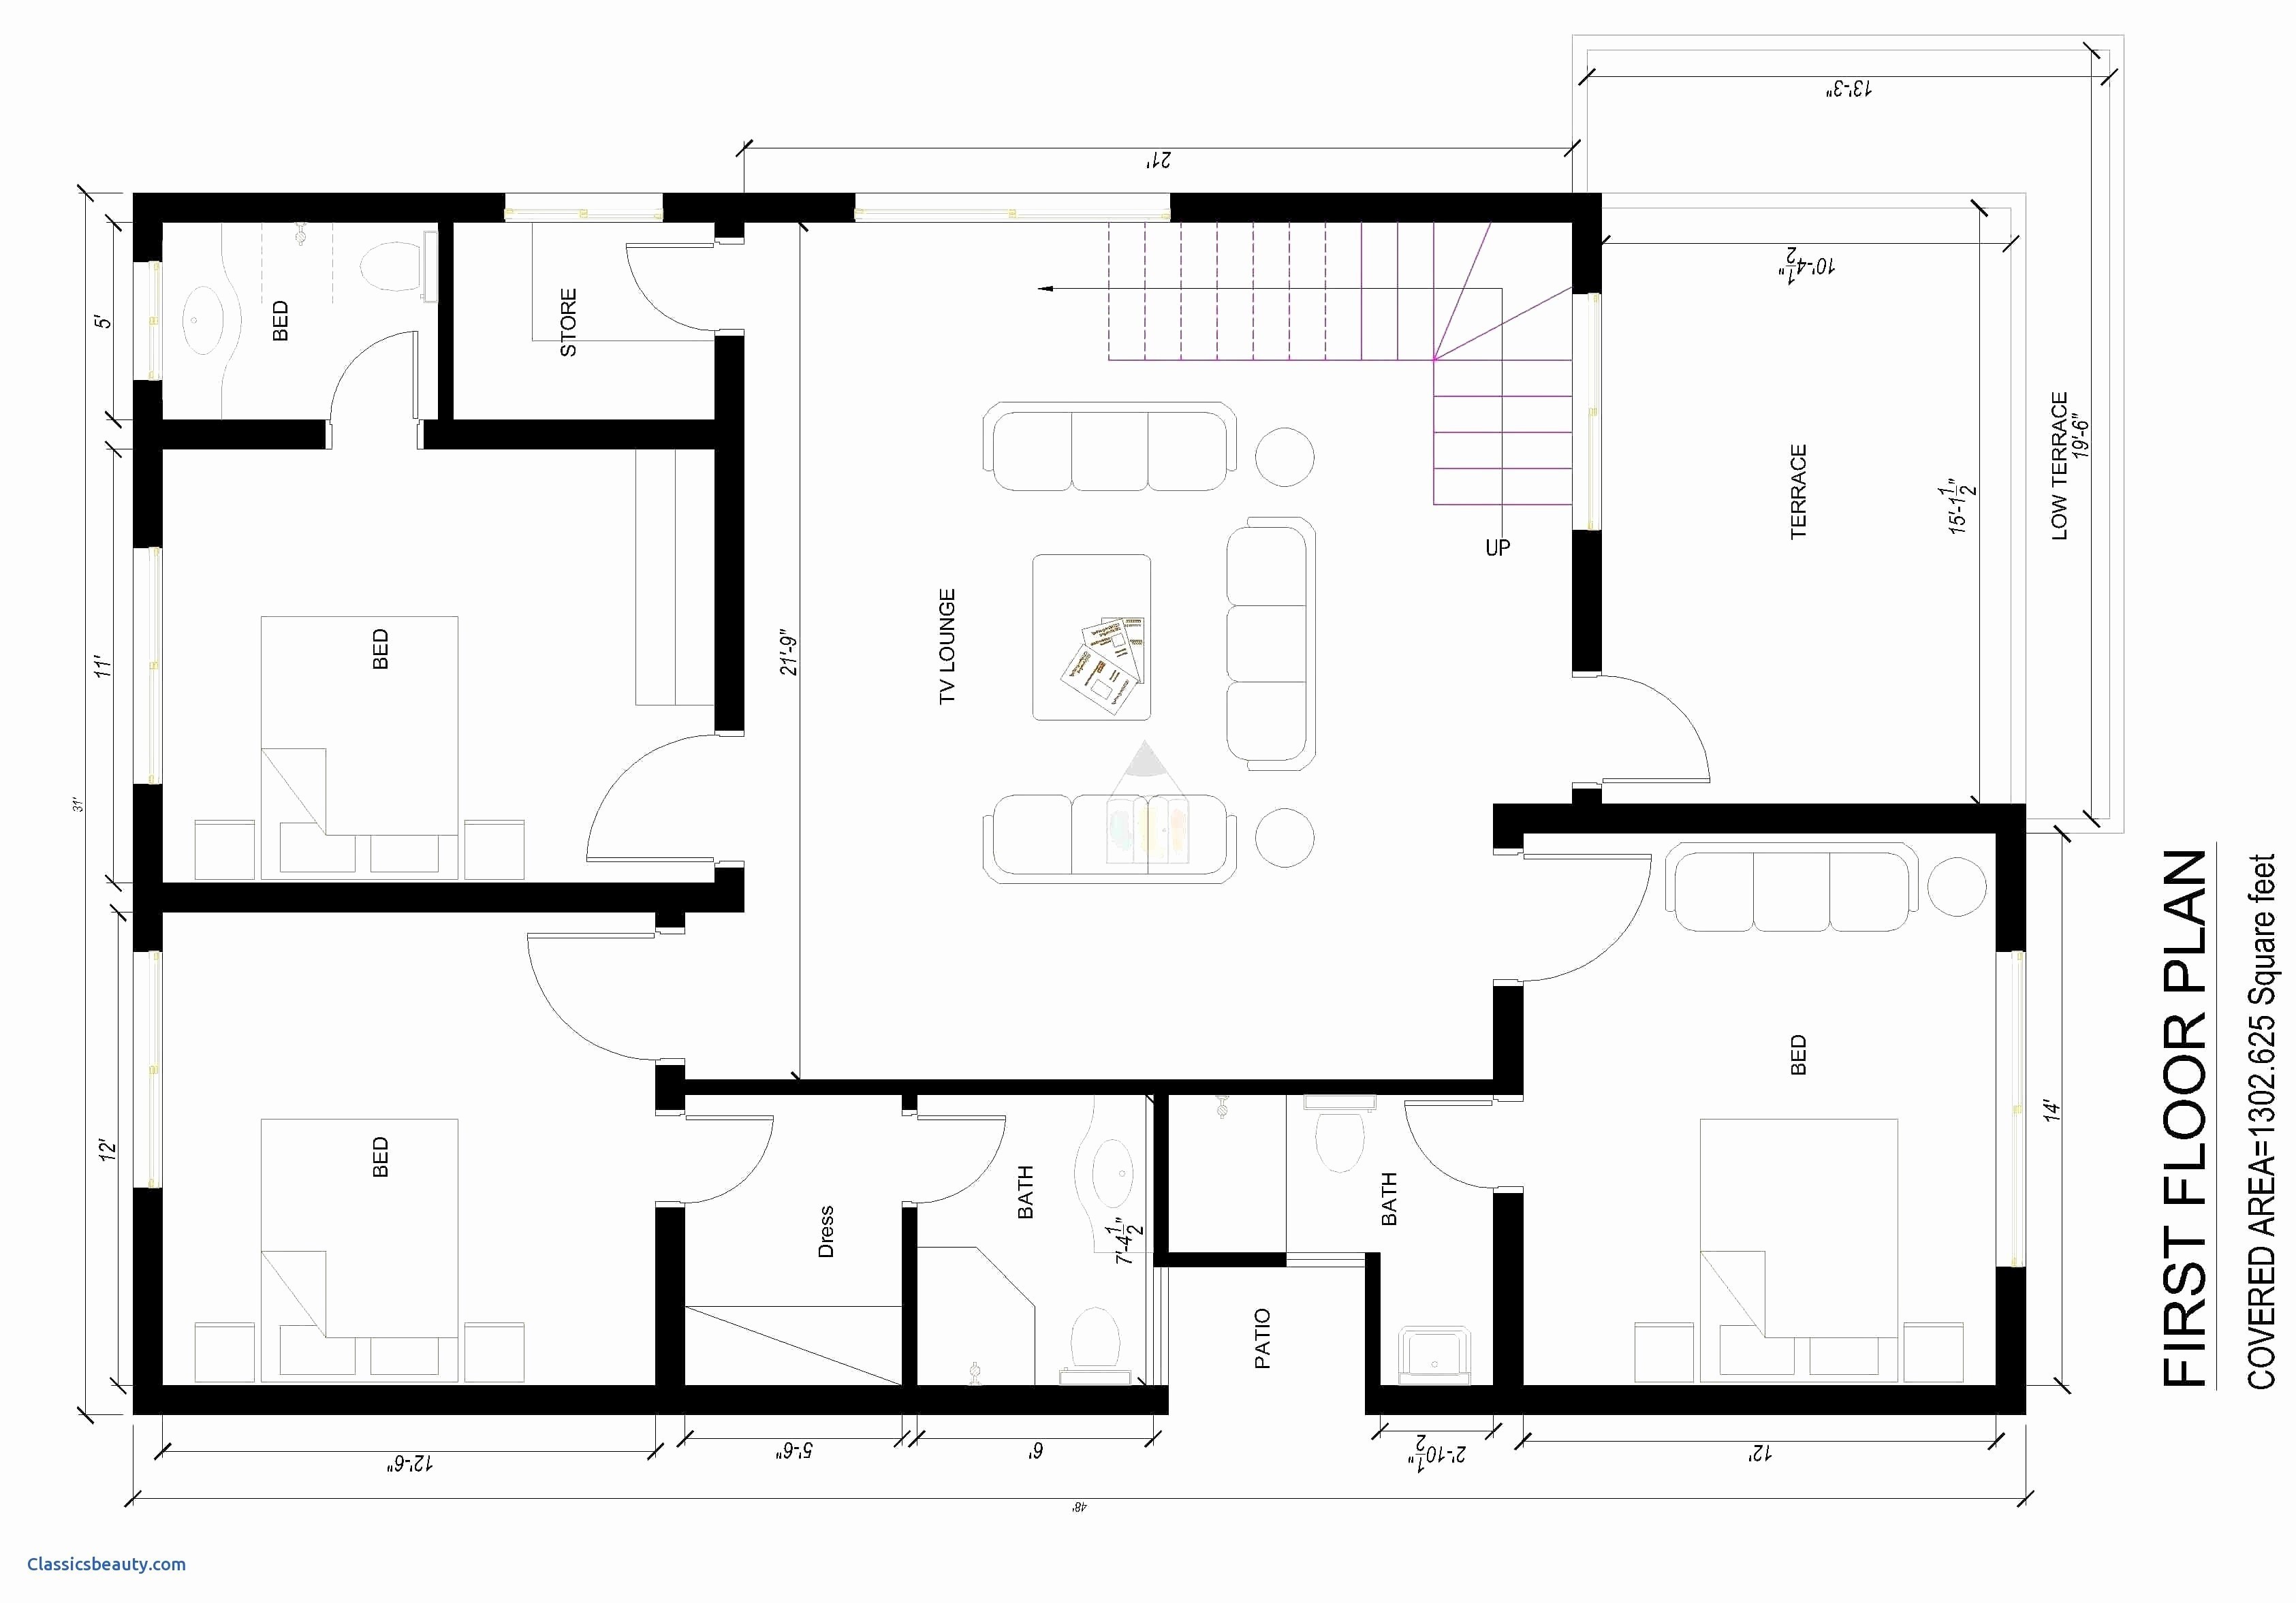 31+ Autocad Small House Plans Drawings Free Download PNG - Best Small